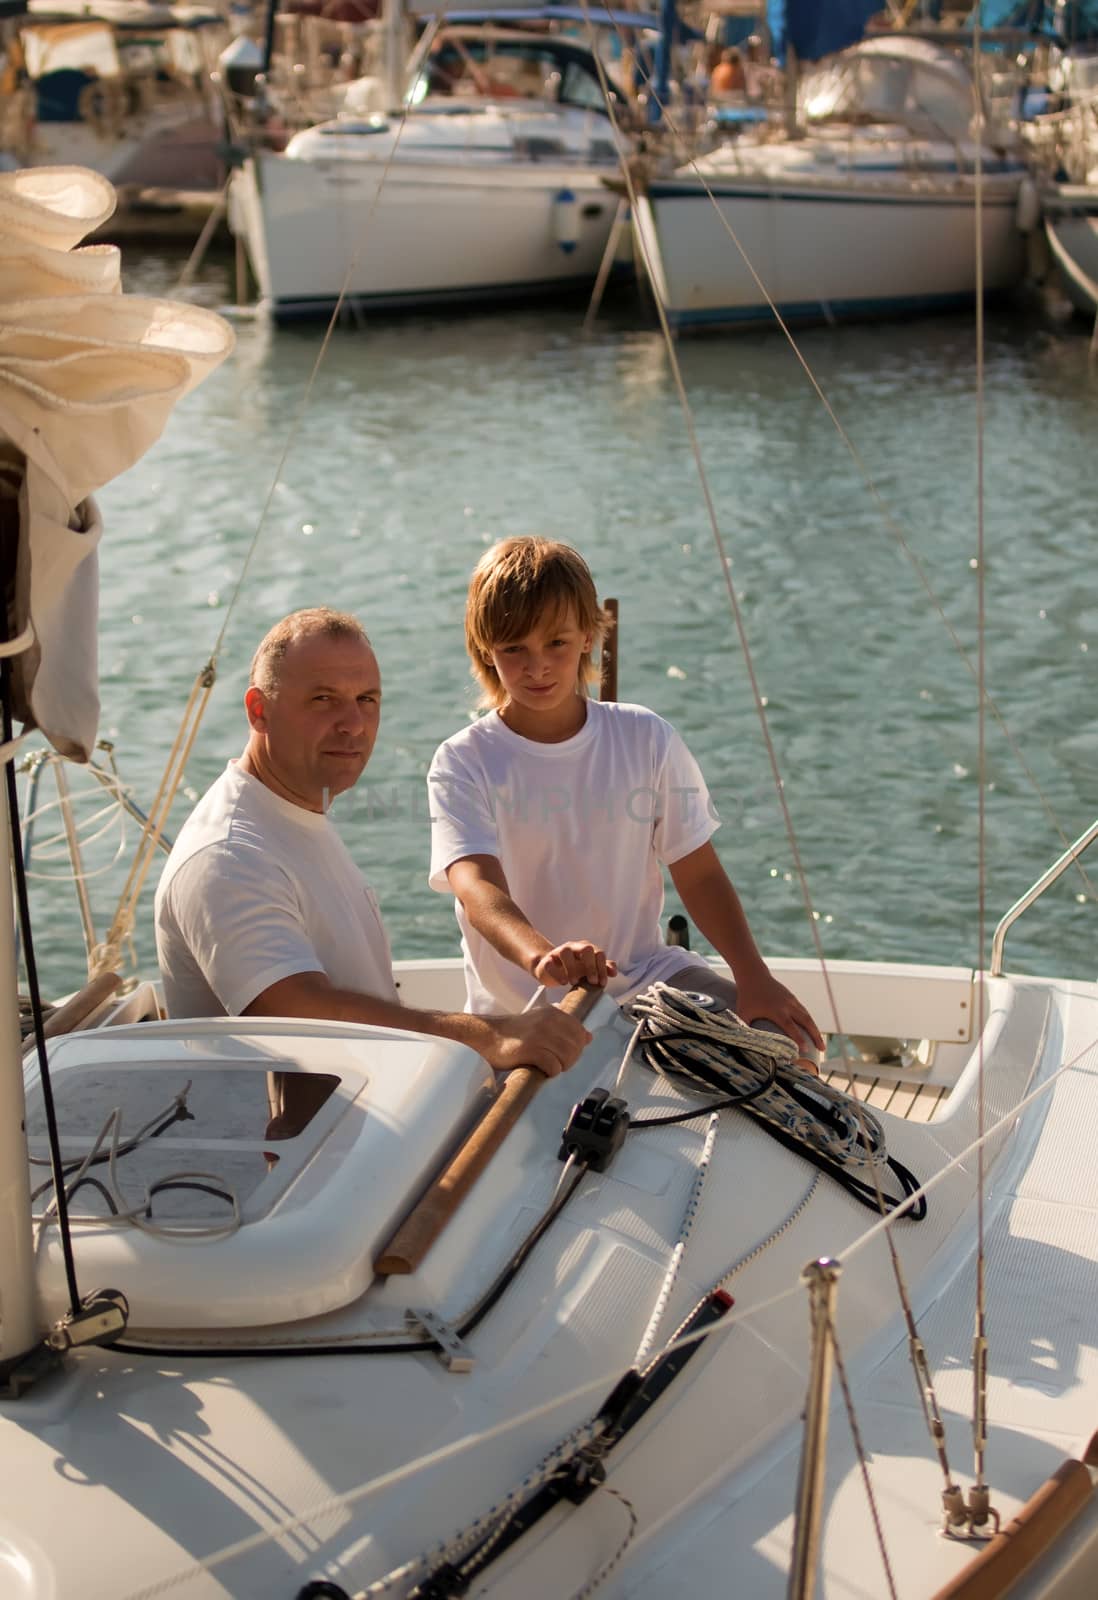 Dad and son on a yacht. by LarisaP